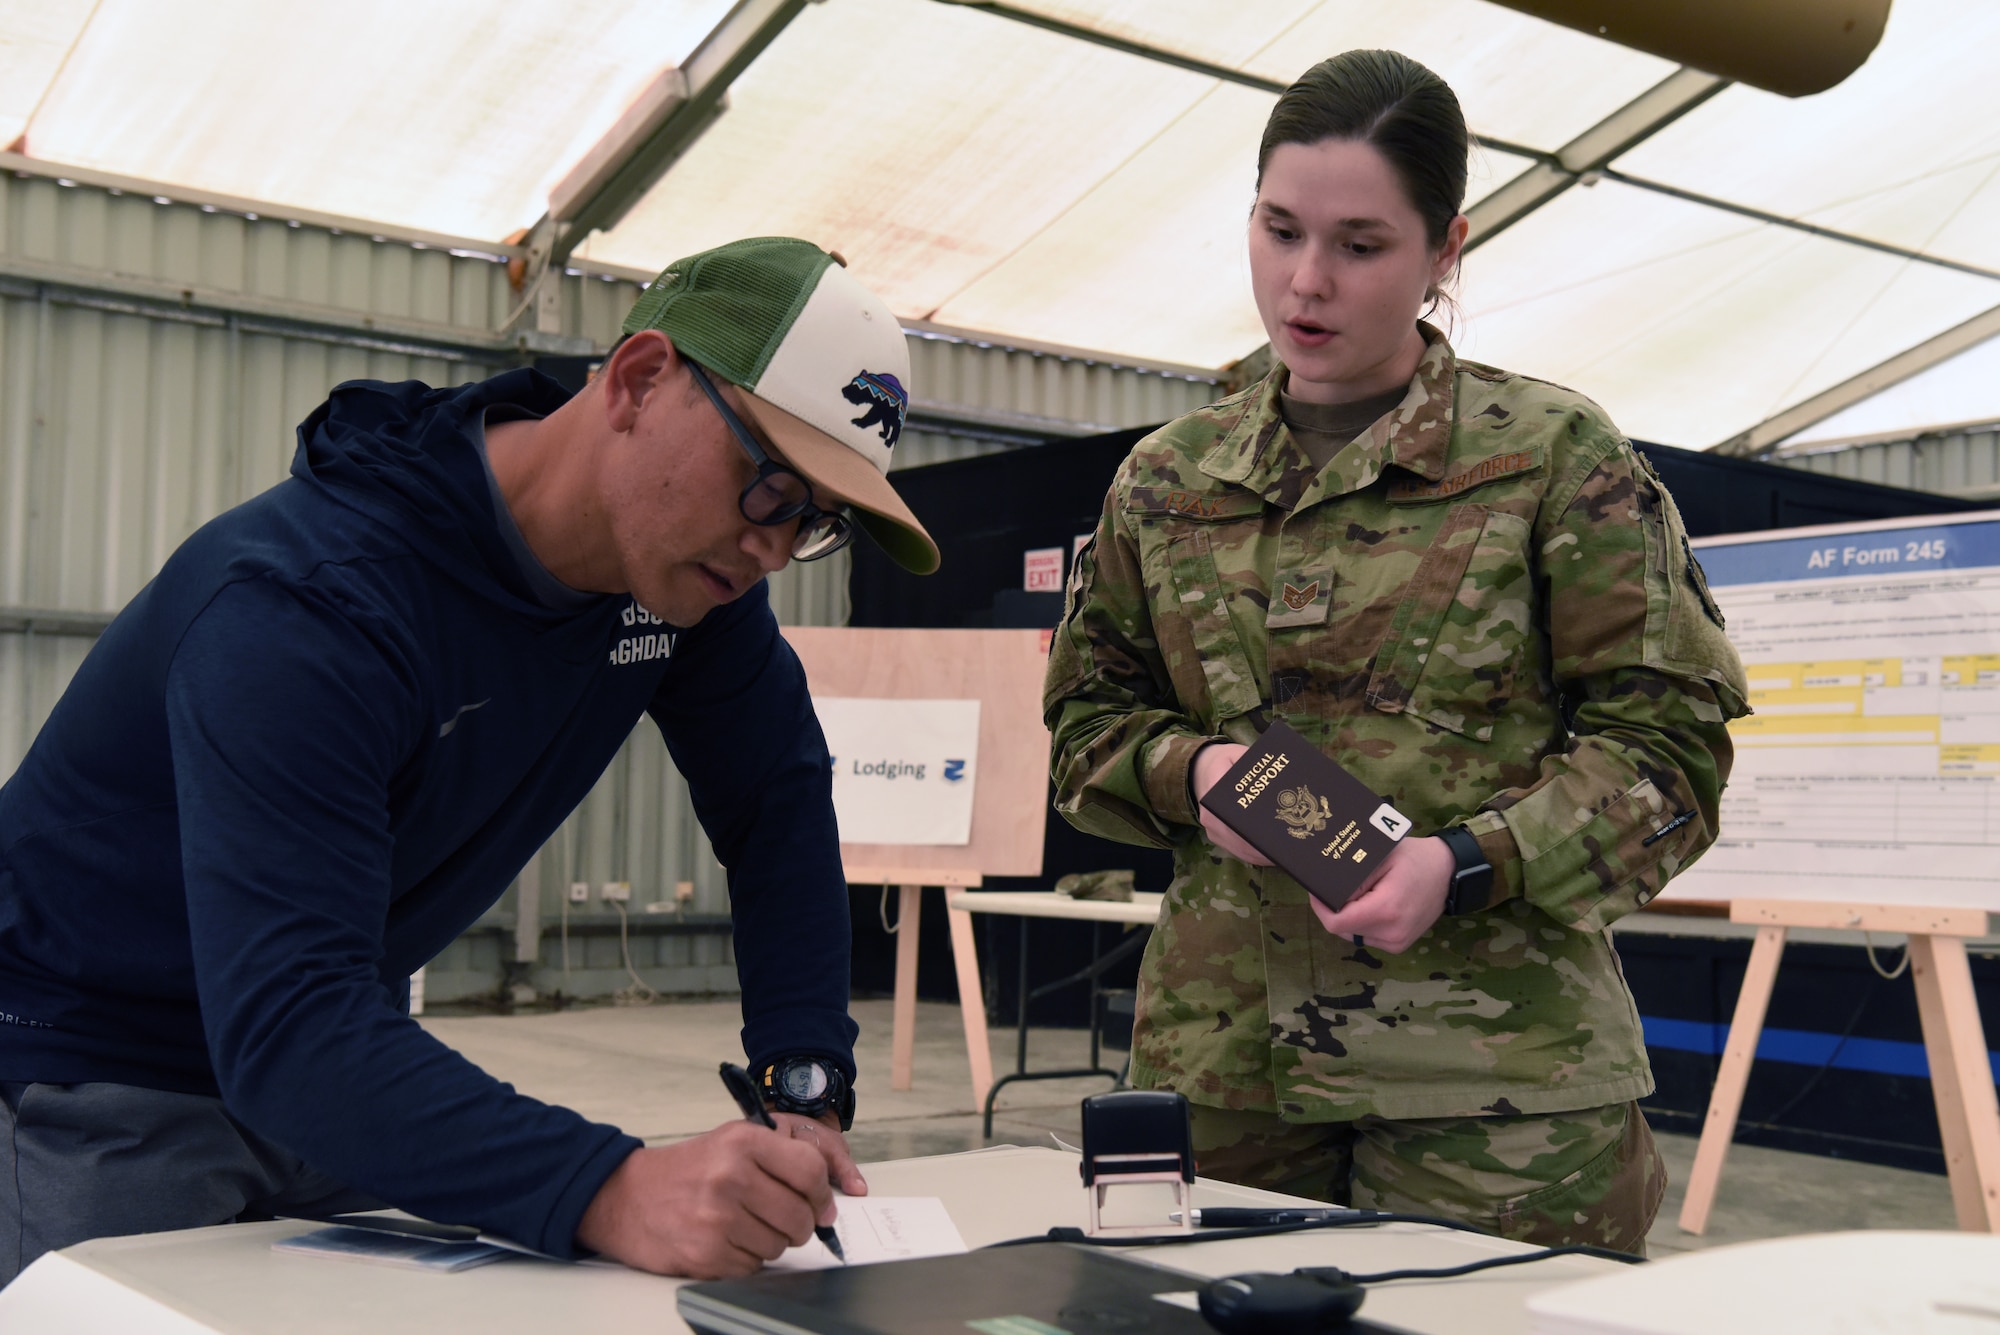 Staff Sgt. Samantha Rak, 380th Air Expeditionary Wing Host Nation Coordination Office immigrations technician, verifies the paperwork of an inbound member at Al Dhafra Air Base, United Arab Emirates, Mar. 5, 2019.